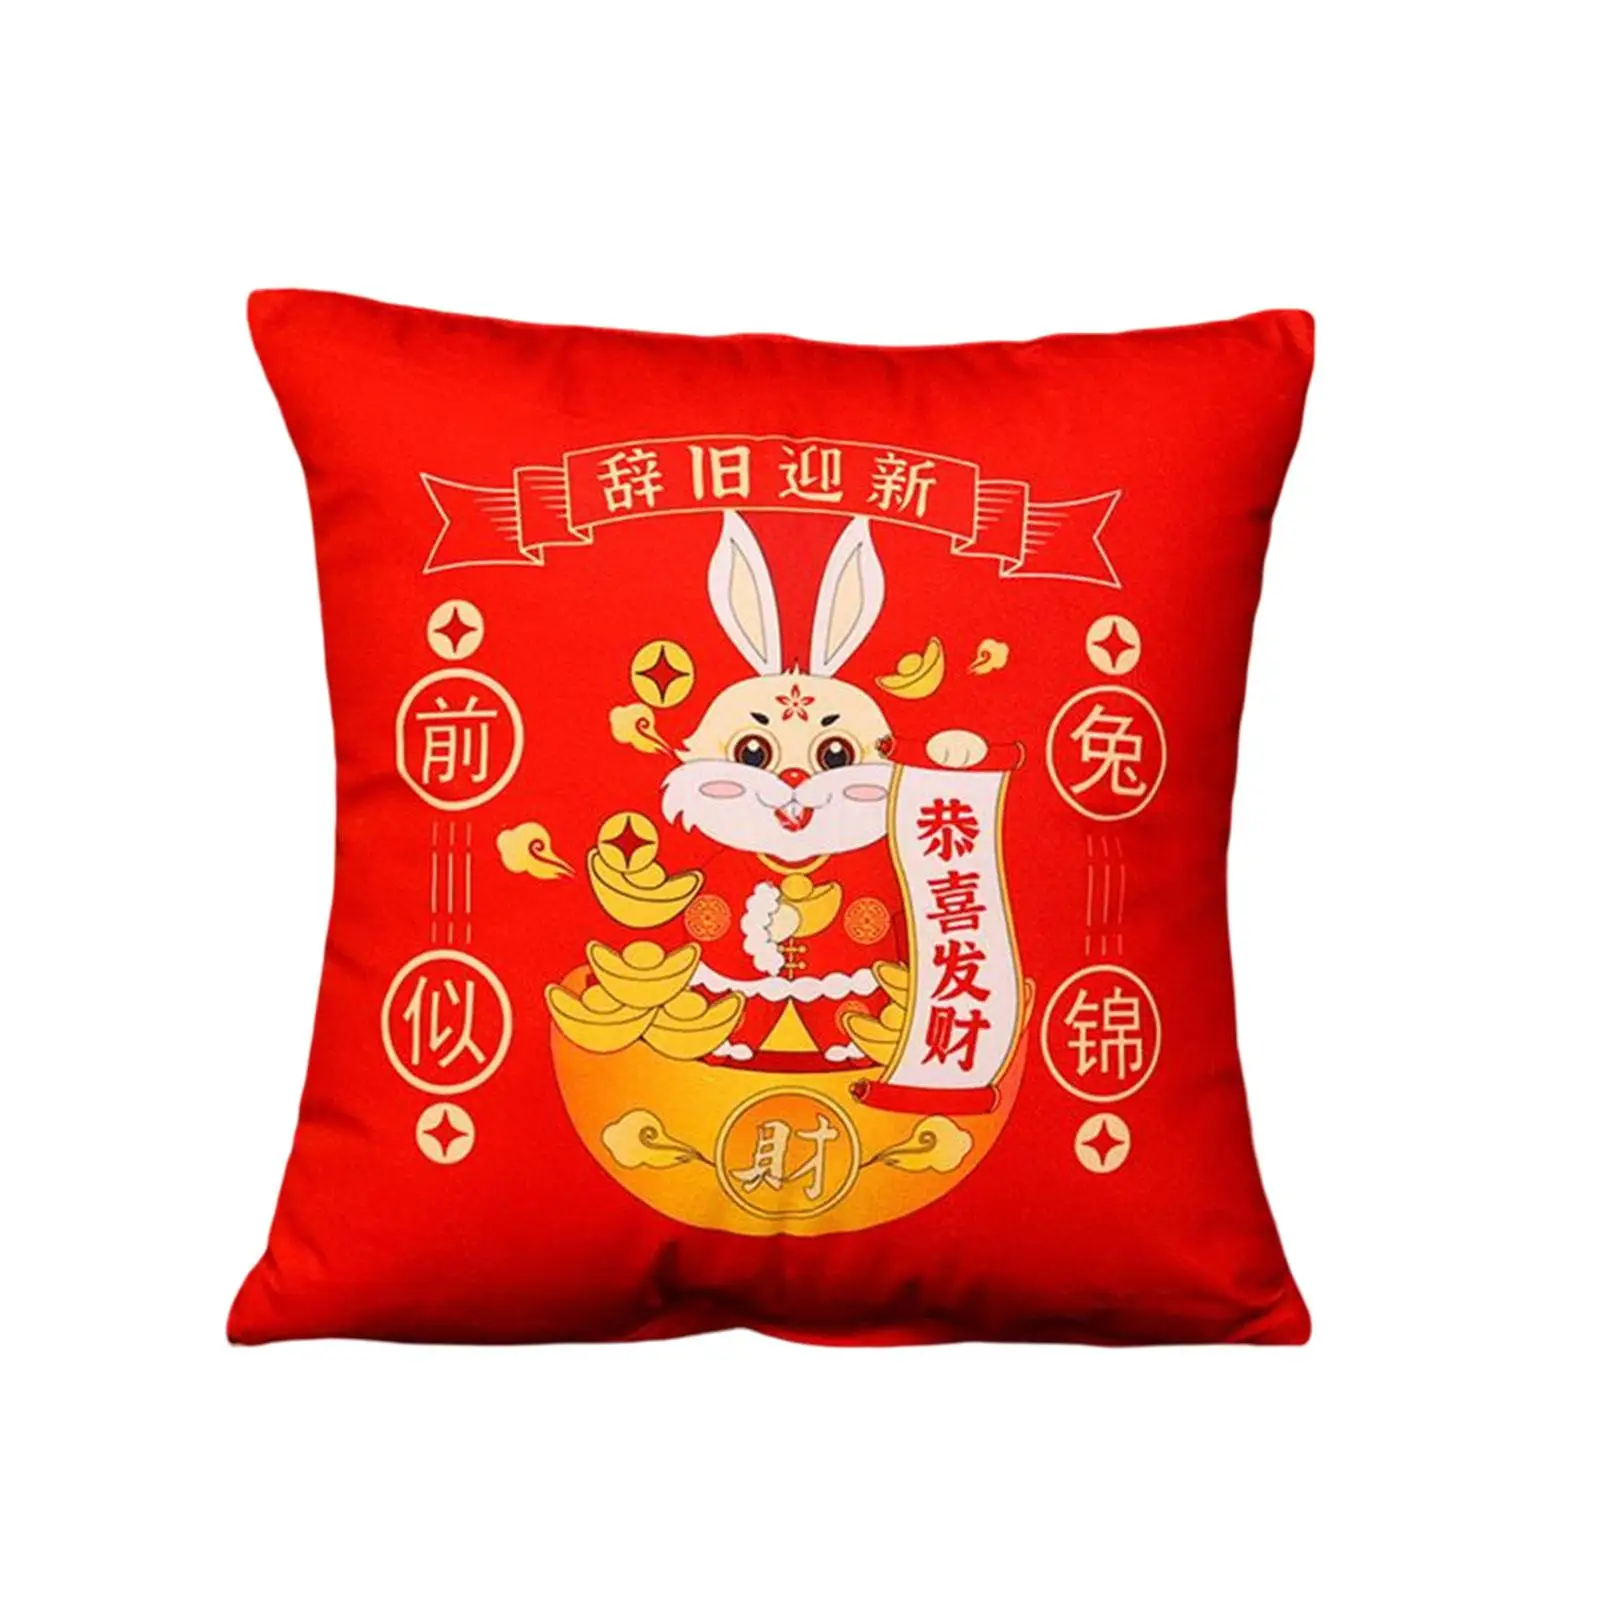 15inch Sofa Pillow invisible Zipper Home Decor Square Washable Soft Breathable Lunar New Year Decorative Cushion for car Office